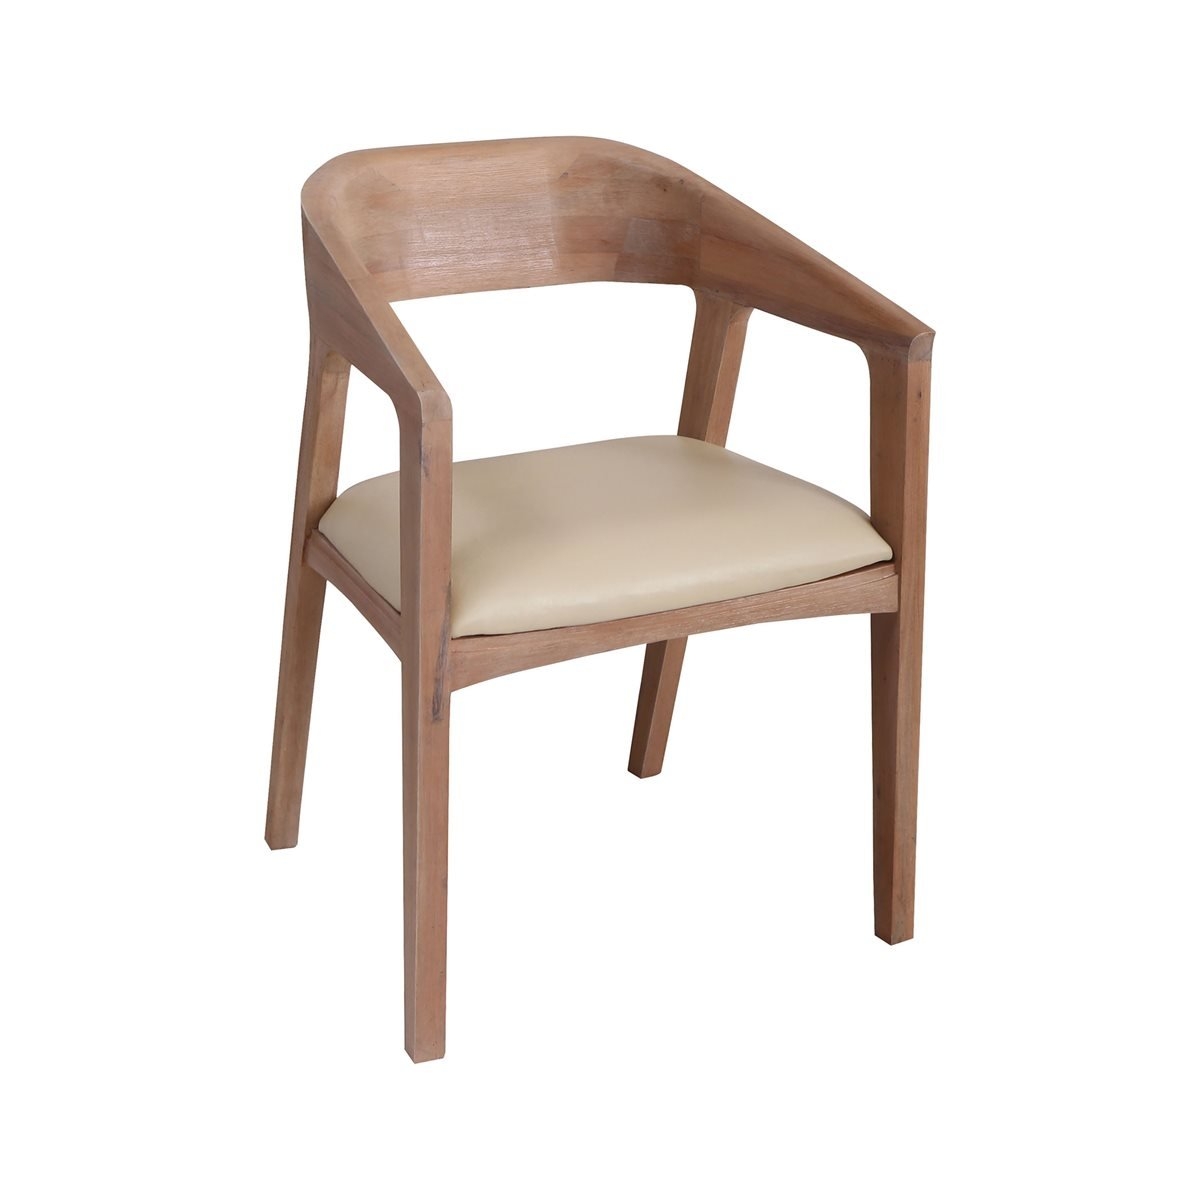 INWOOD LIGHT MAHOGANY STAIN SOLID MAHOGANY DINING CHAIR WITH AU LAIT LEATHER CUSHION - Image 0